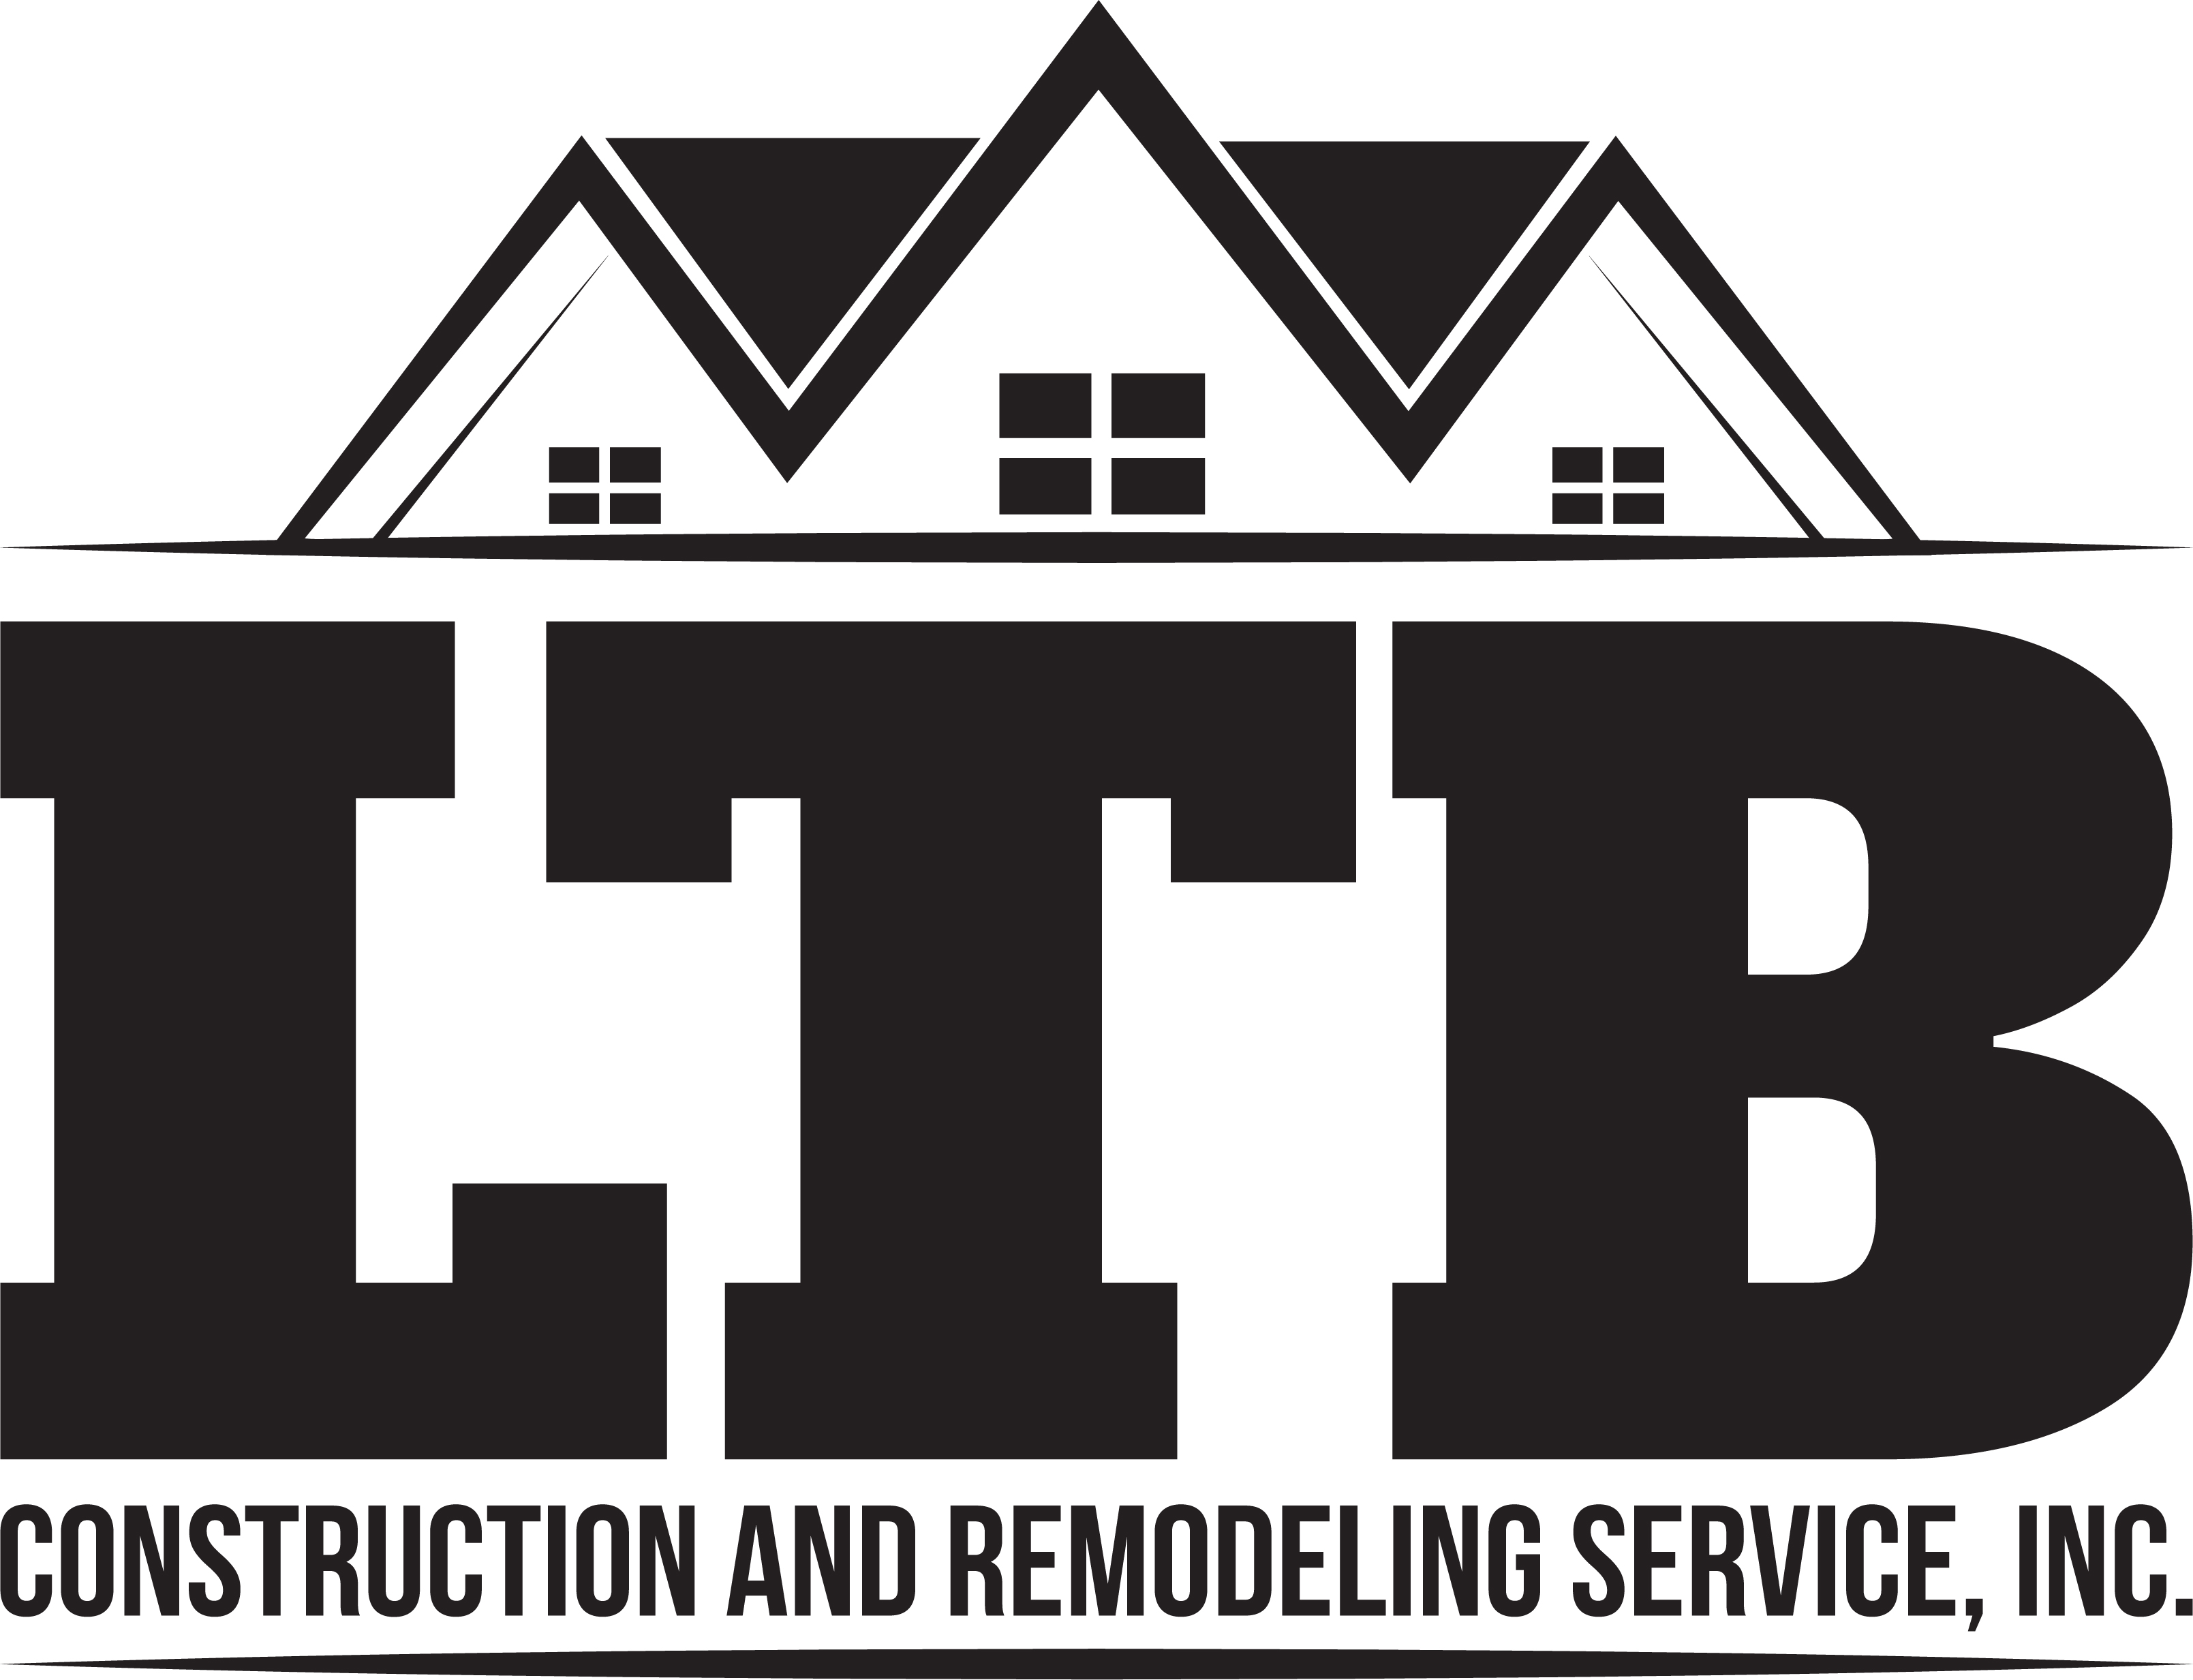 LTB Construction and Remodeling Service, Inc. Logo